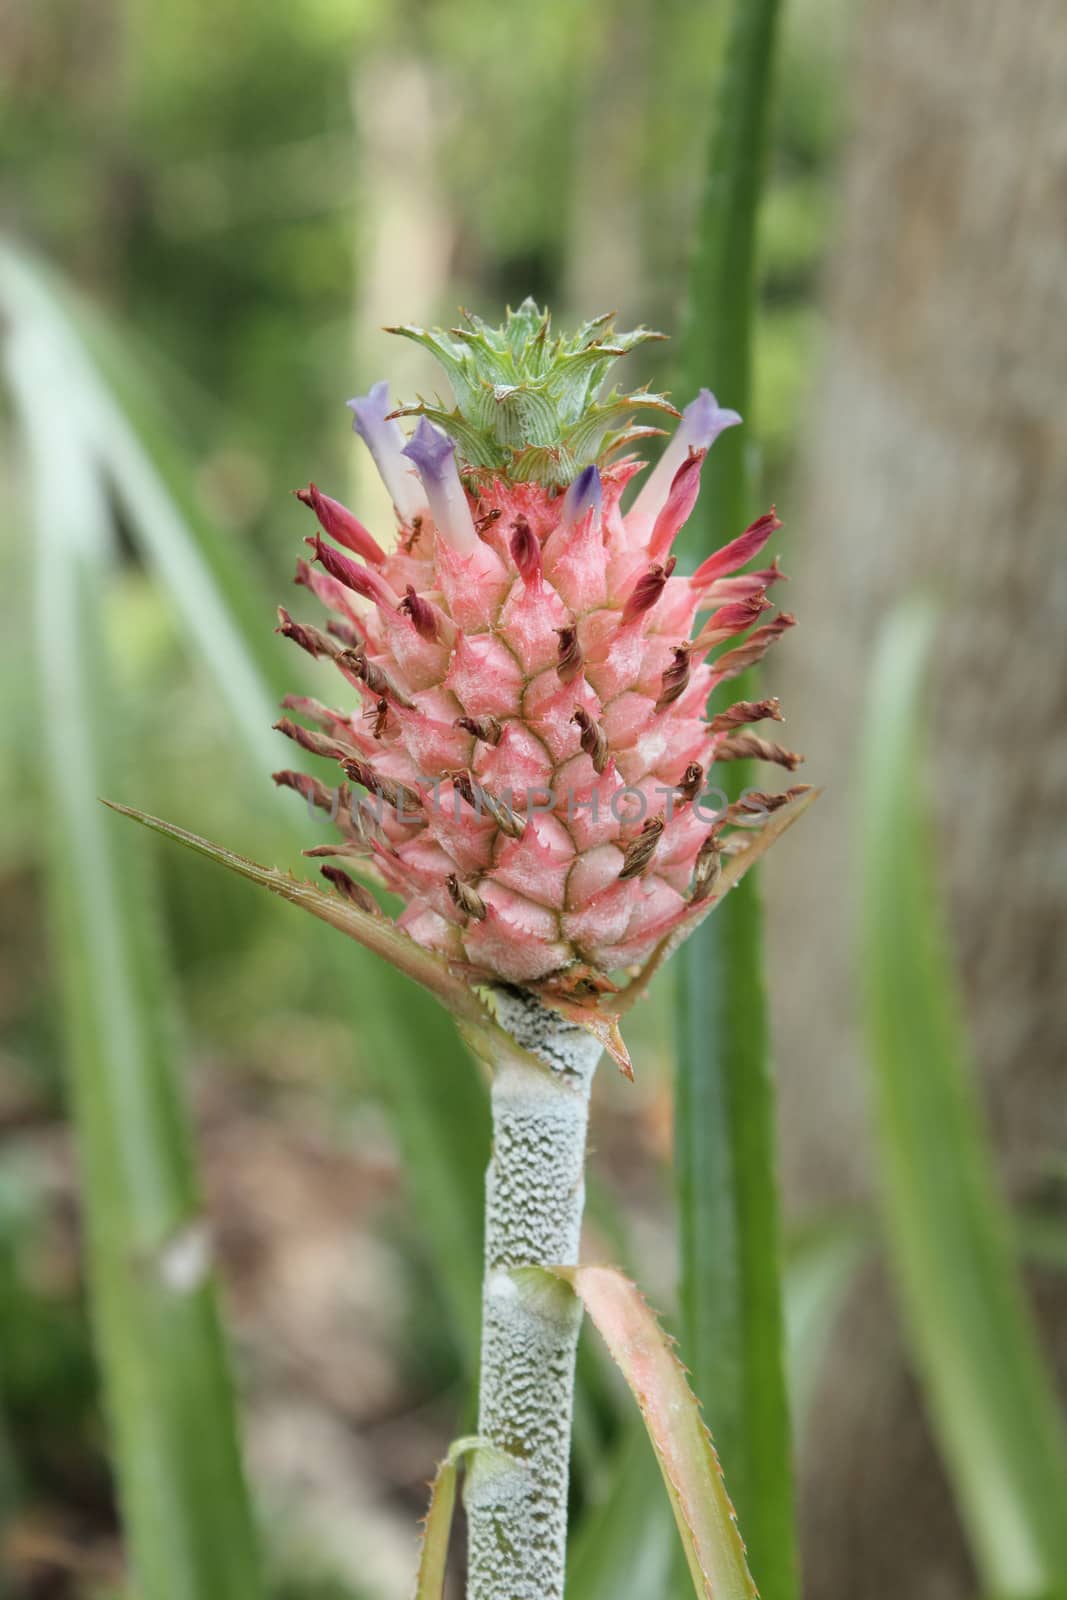 Pineapple fruit and plant growing